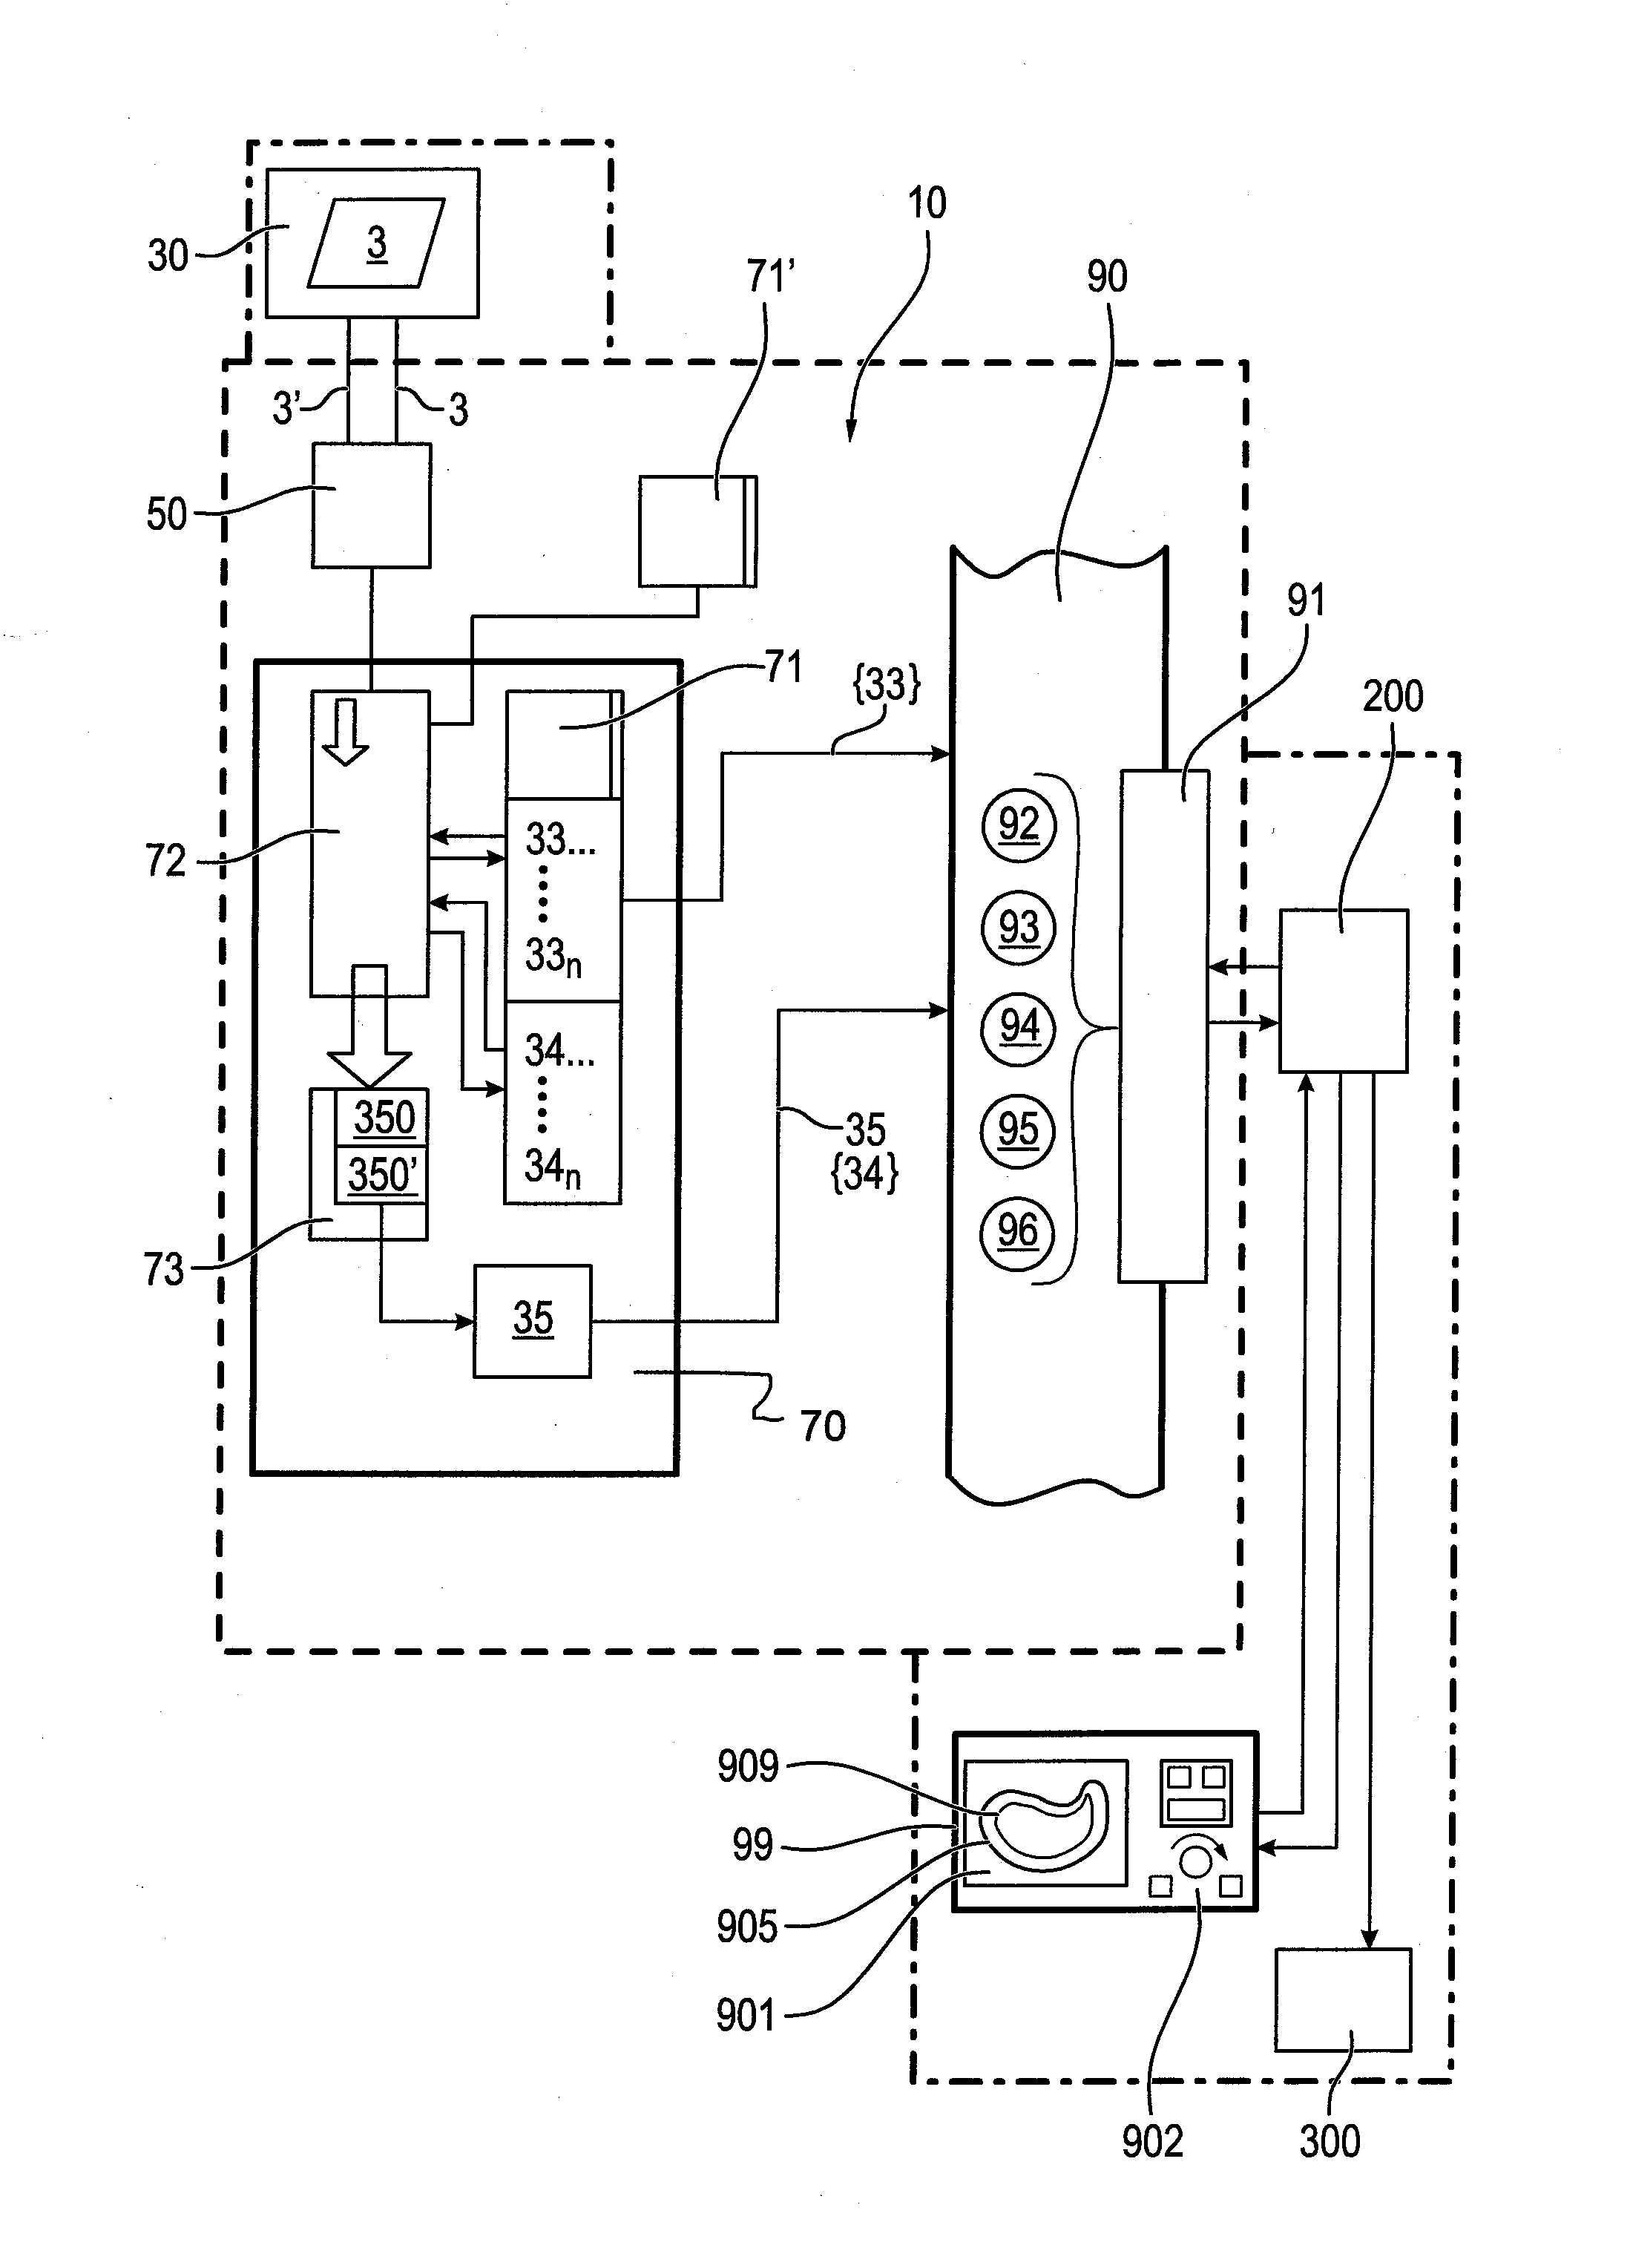 Device for processing tomographic data for visualizing the course of a therapy